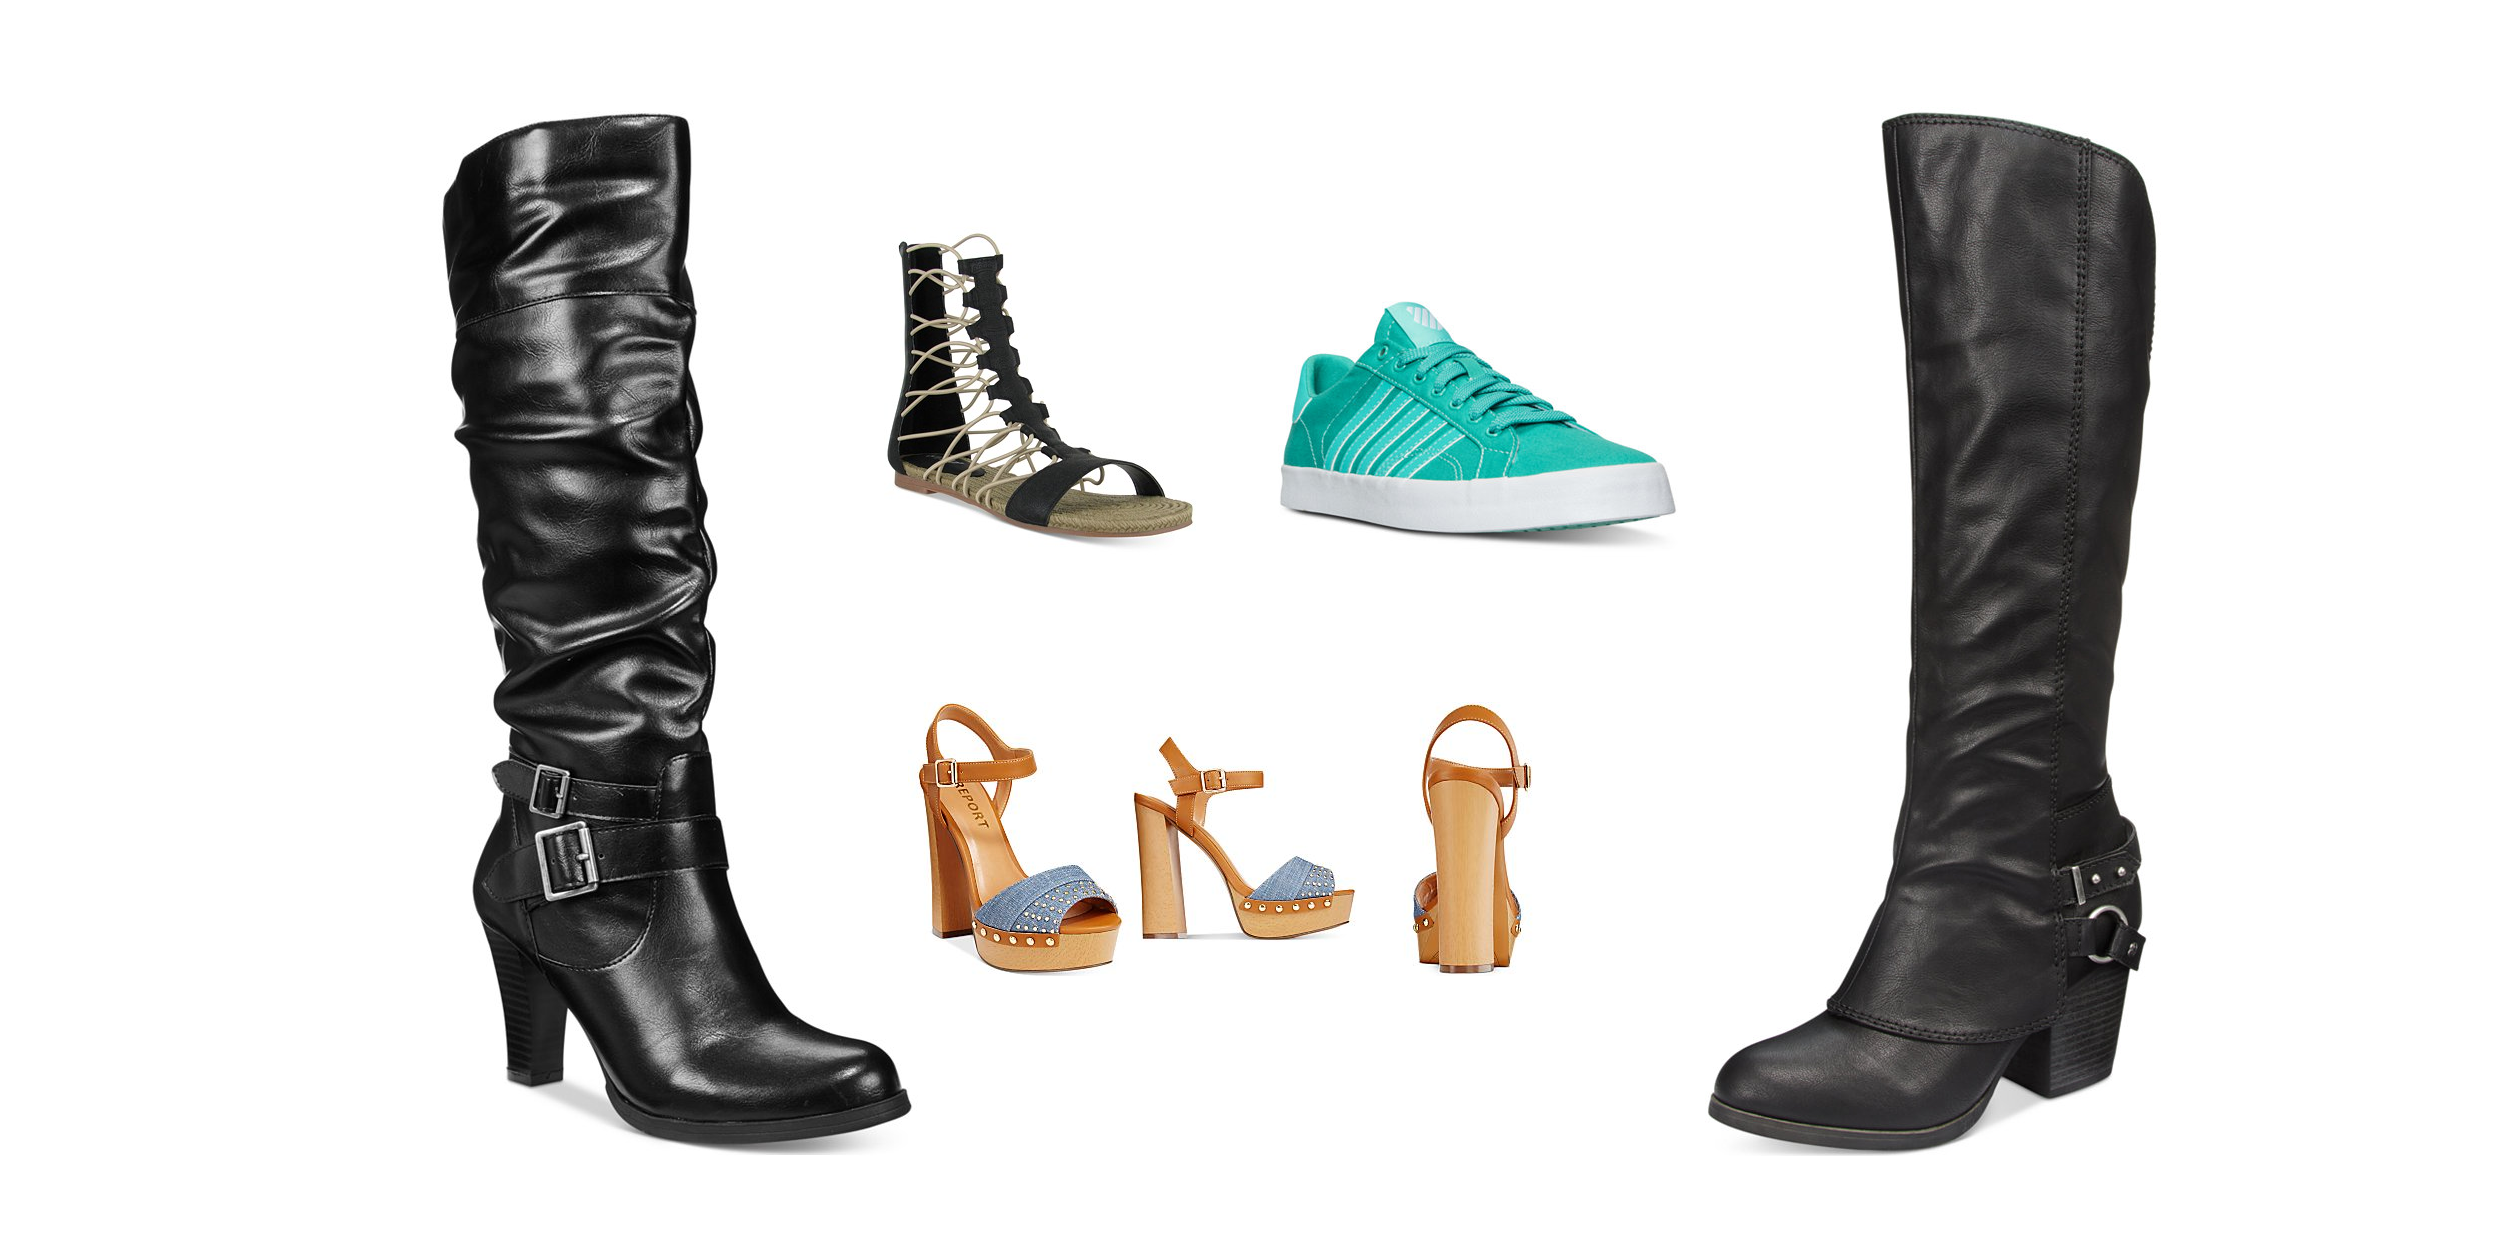 RUN!! HUGE Macy’s Shoe and Boot Clearance + Up to an EXTRA 40% OFF!!